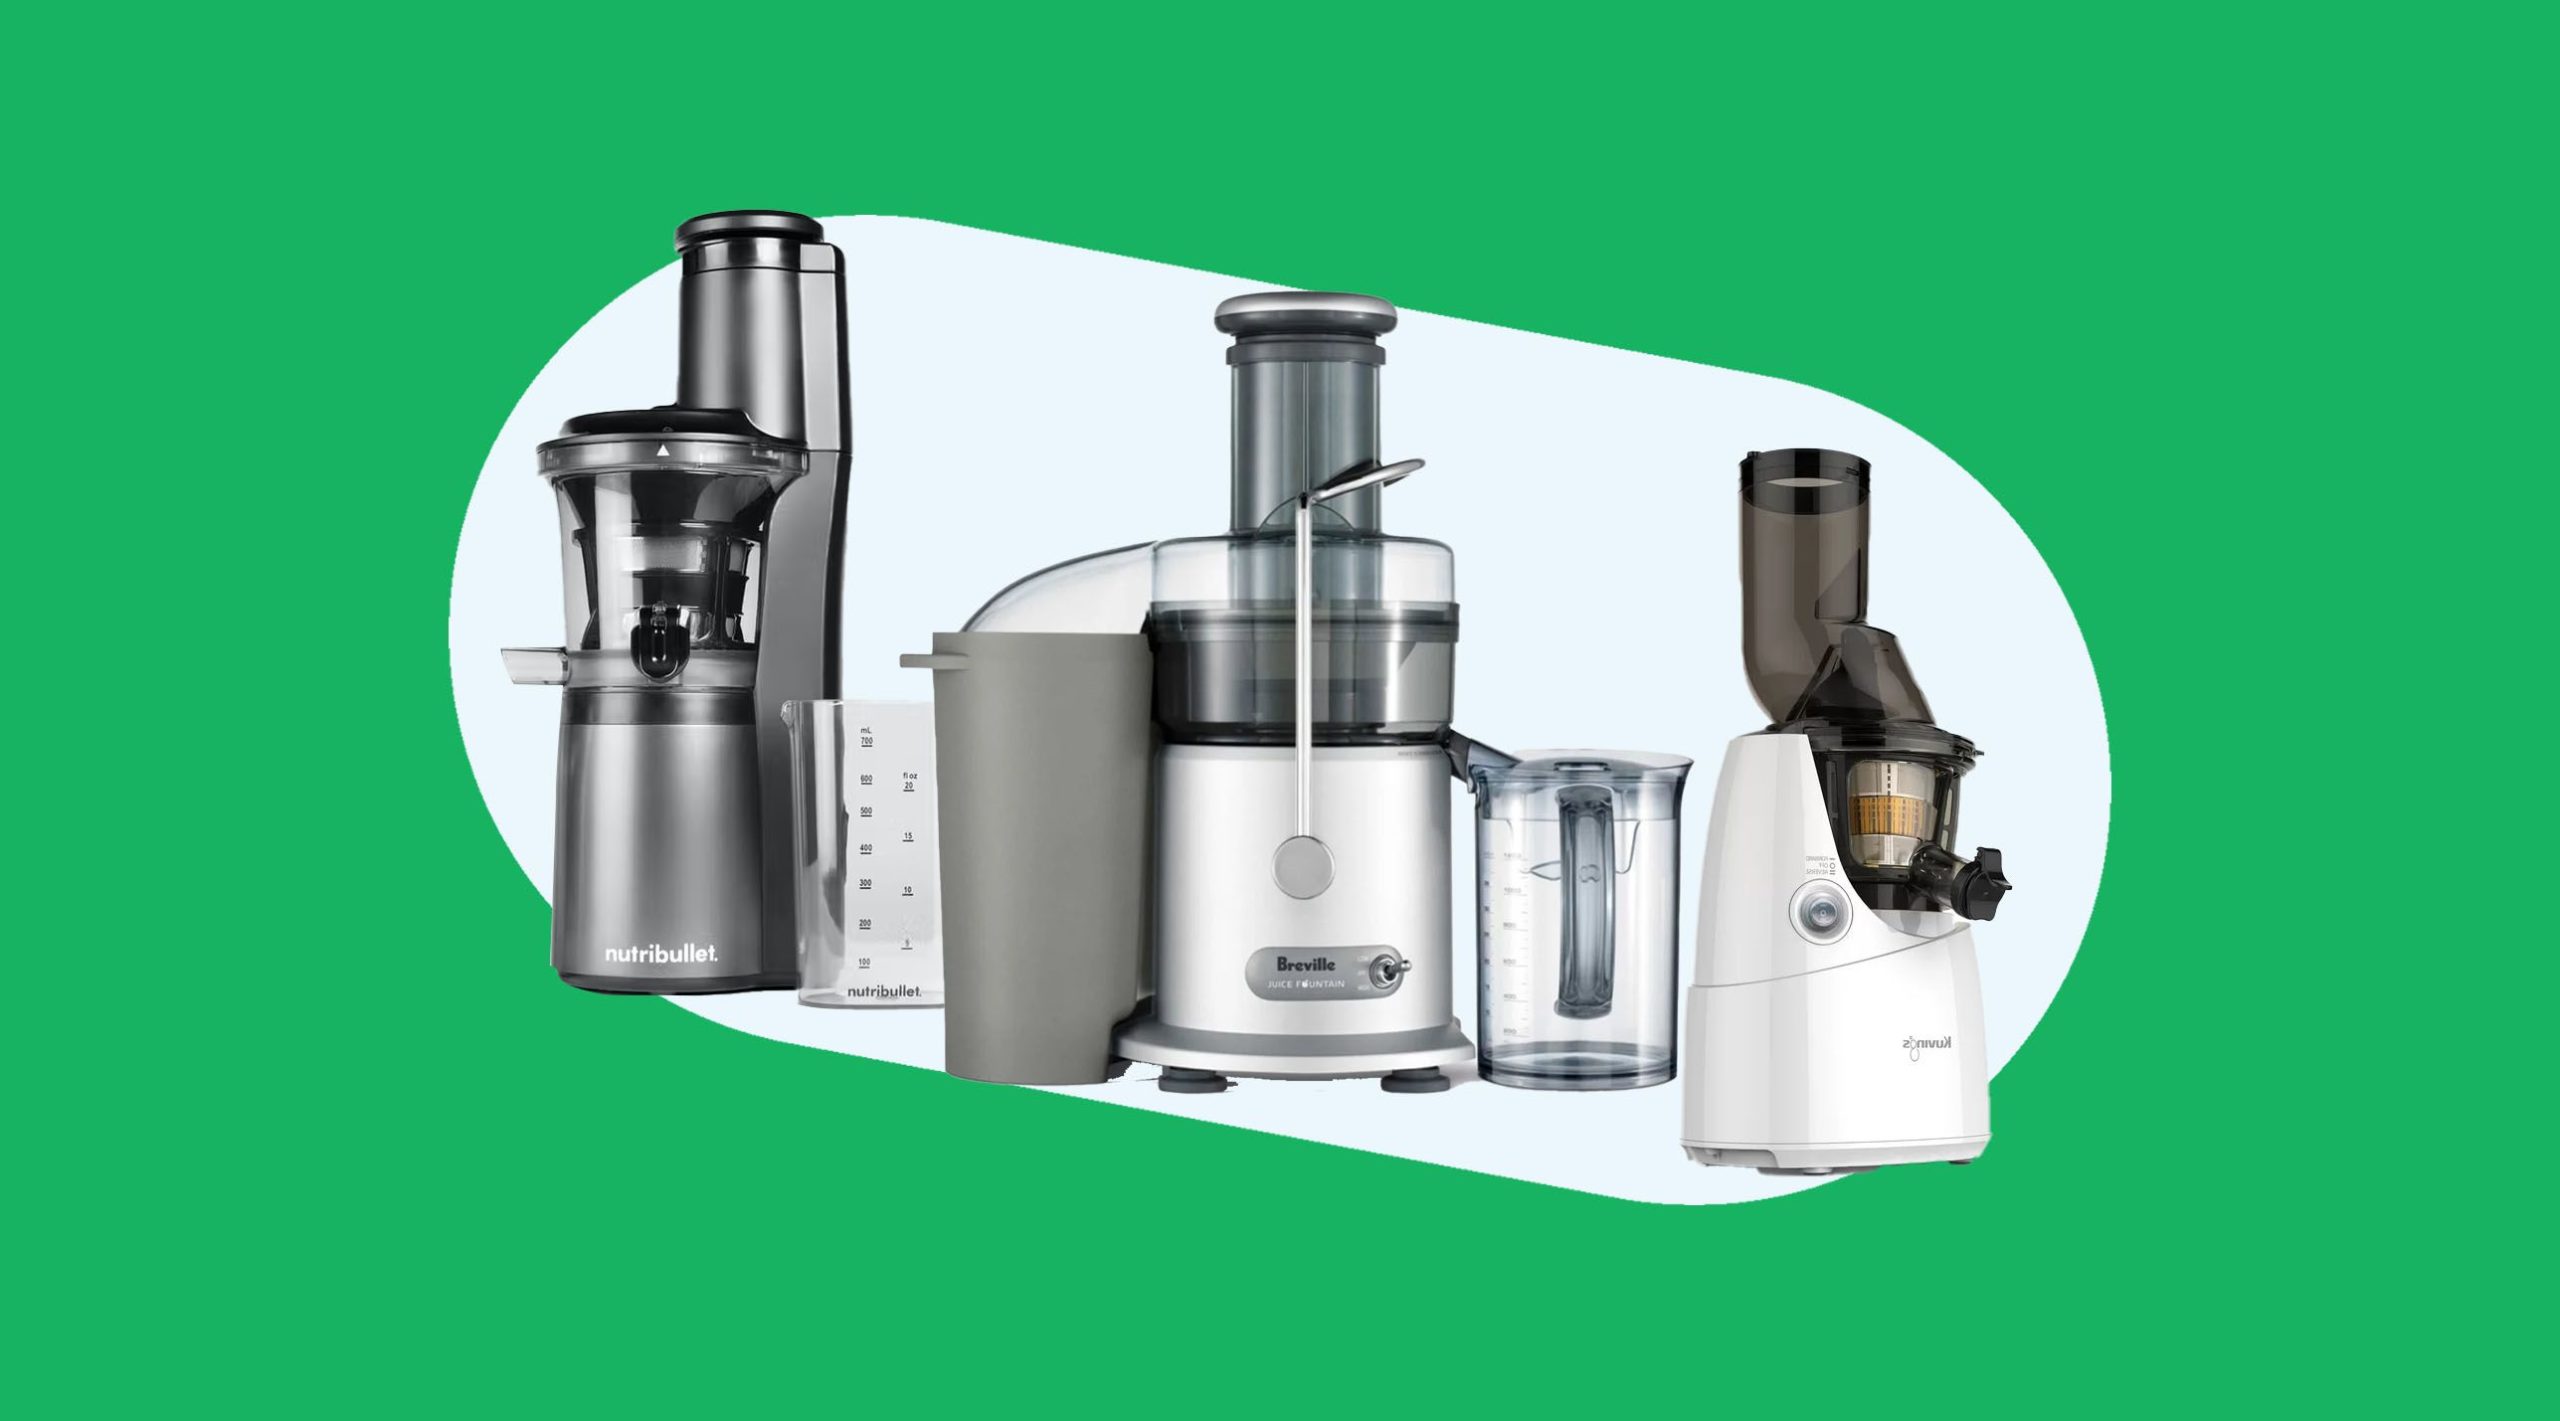 Best Cold Press Juicer For Making Fresh, Delicious Juice At Home